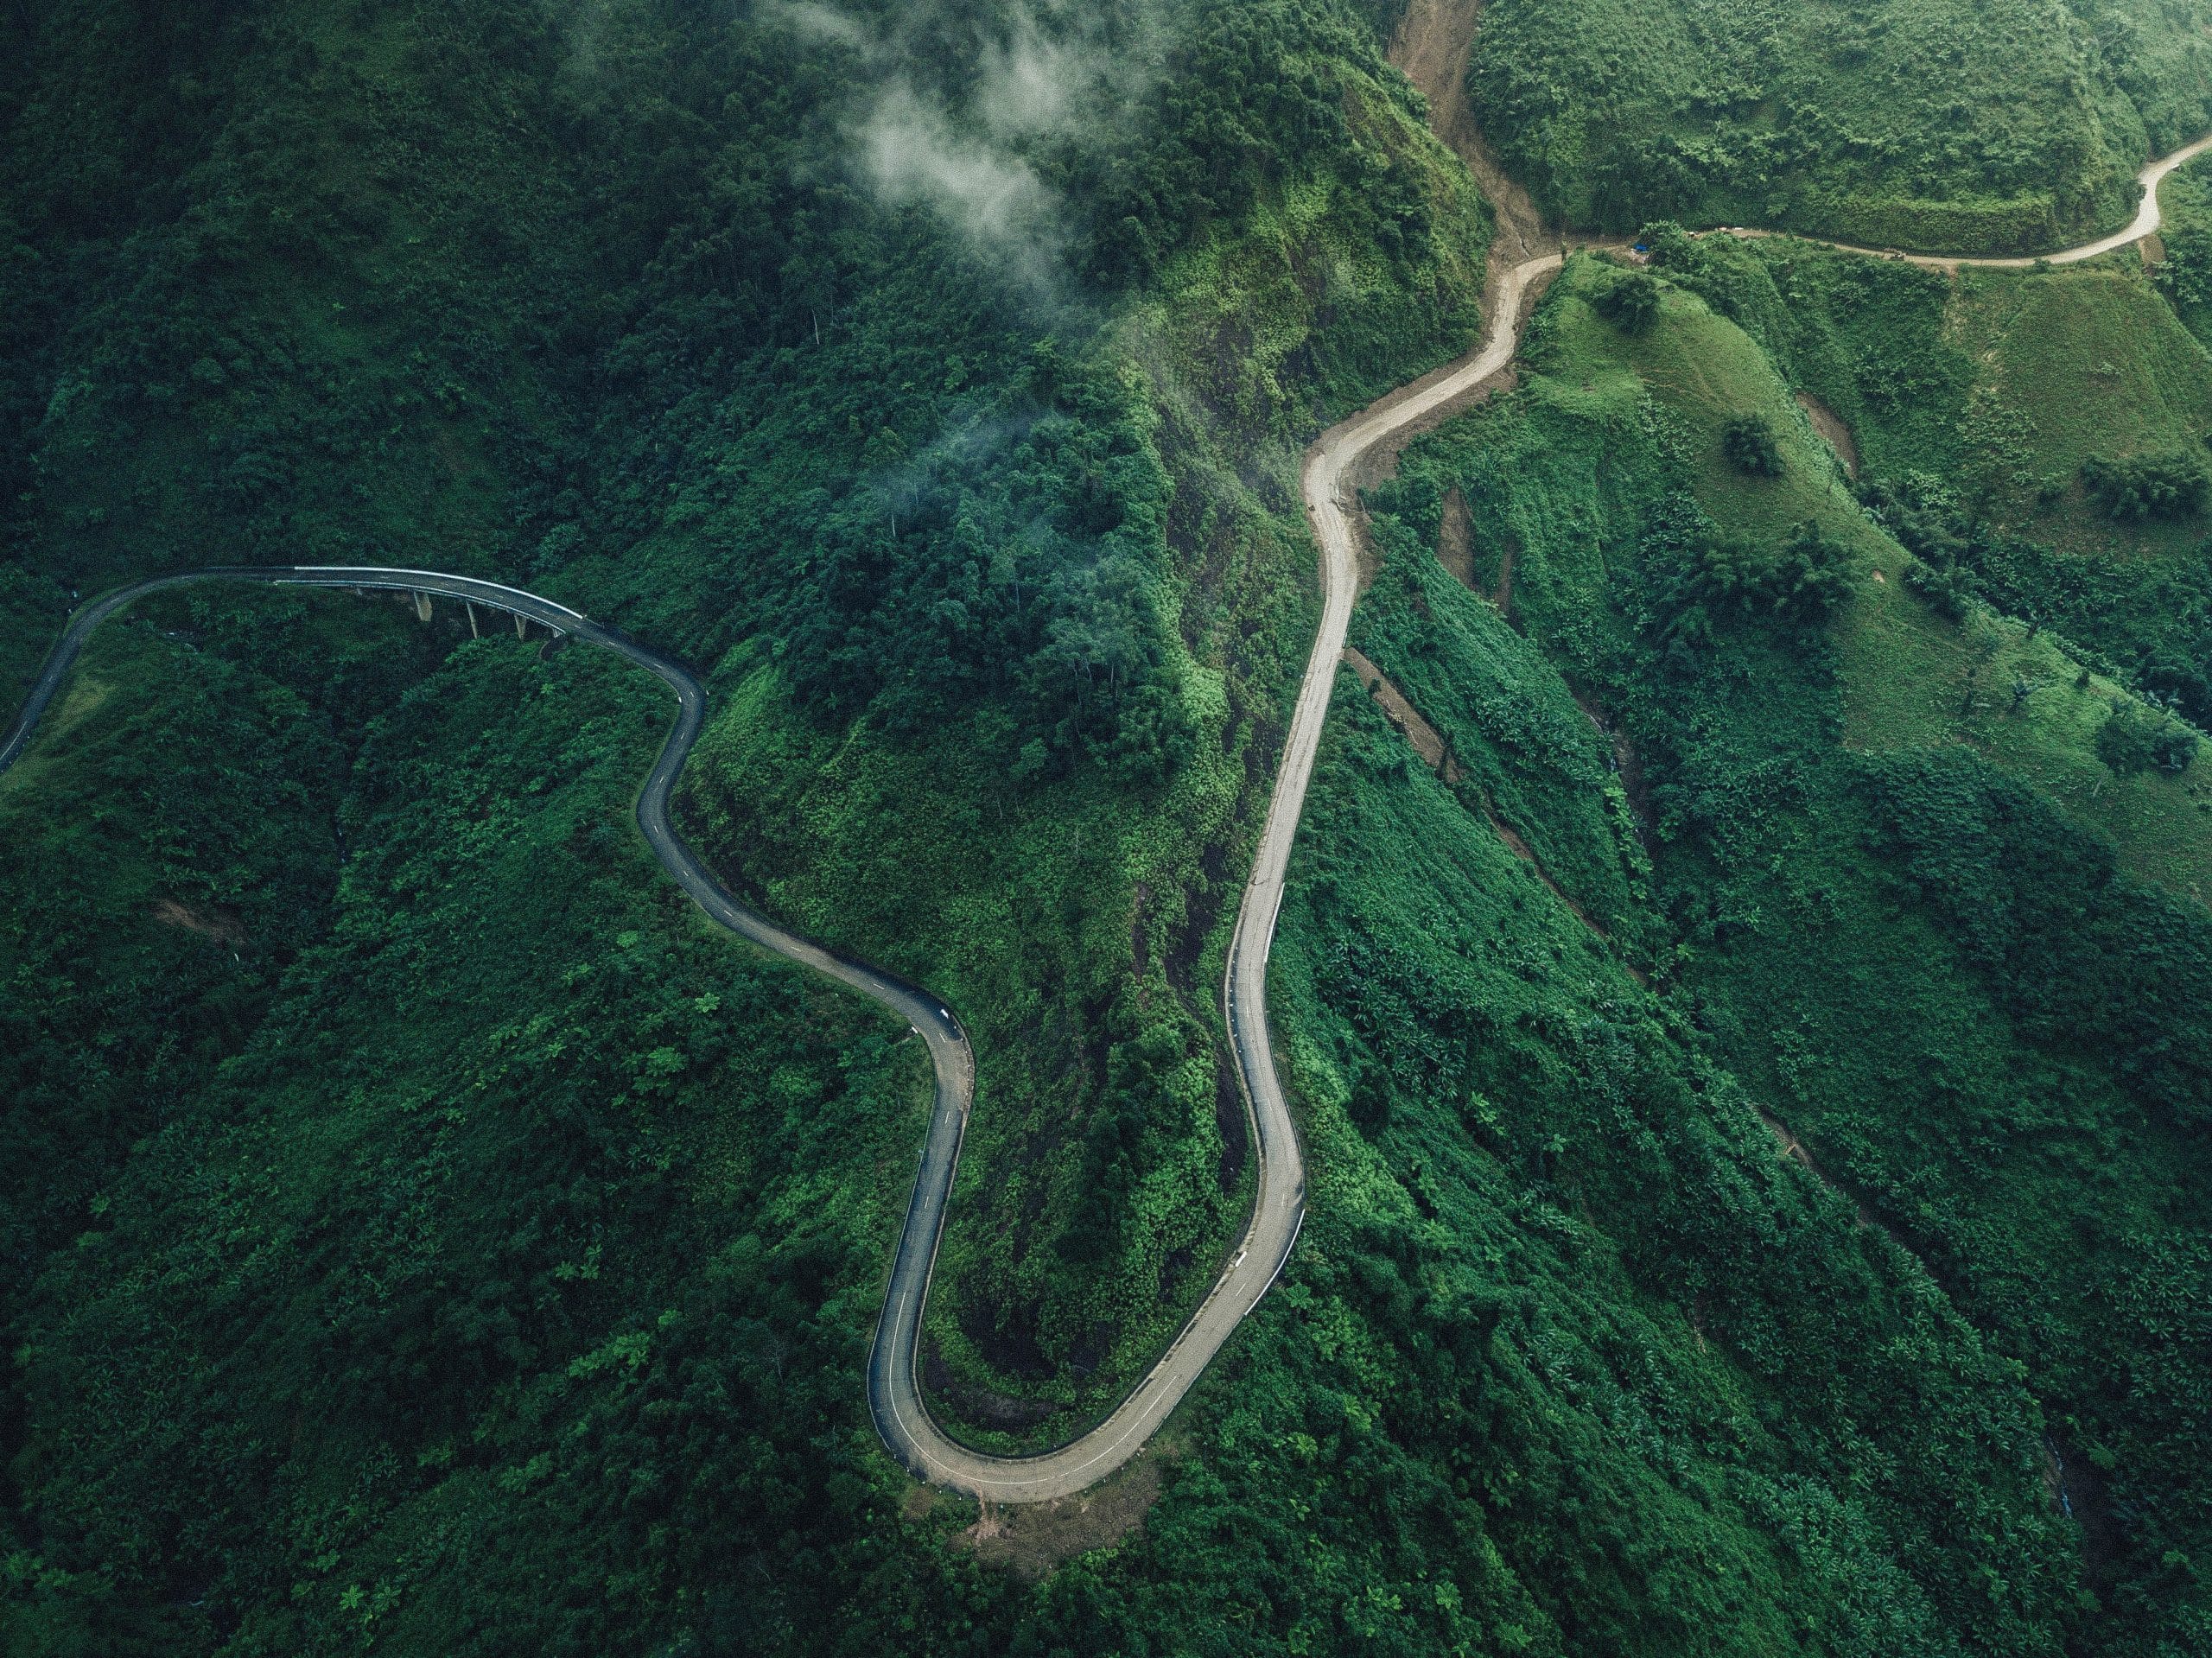 A winding road cuts through lush, green mountainous terrain with clouds hanging low, creating a scenic view reminiscent of the meticulous planning found in the importance of ISO certification.